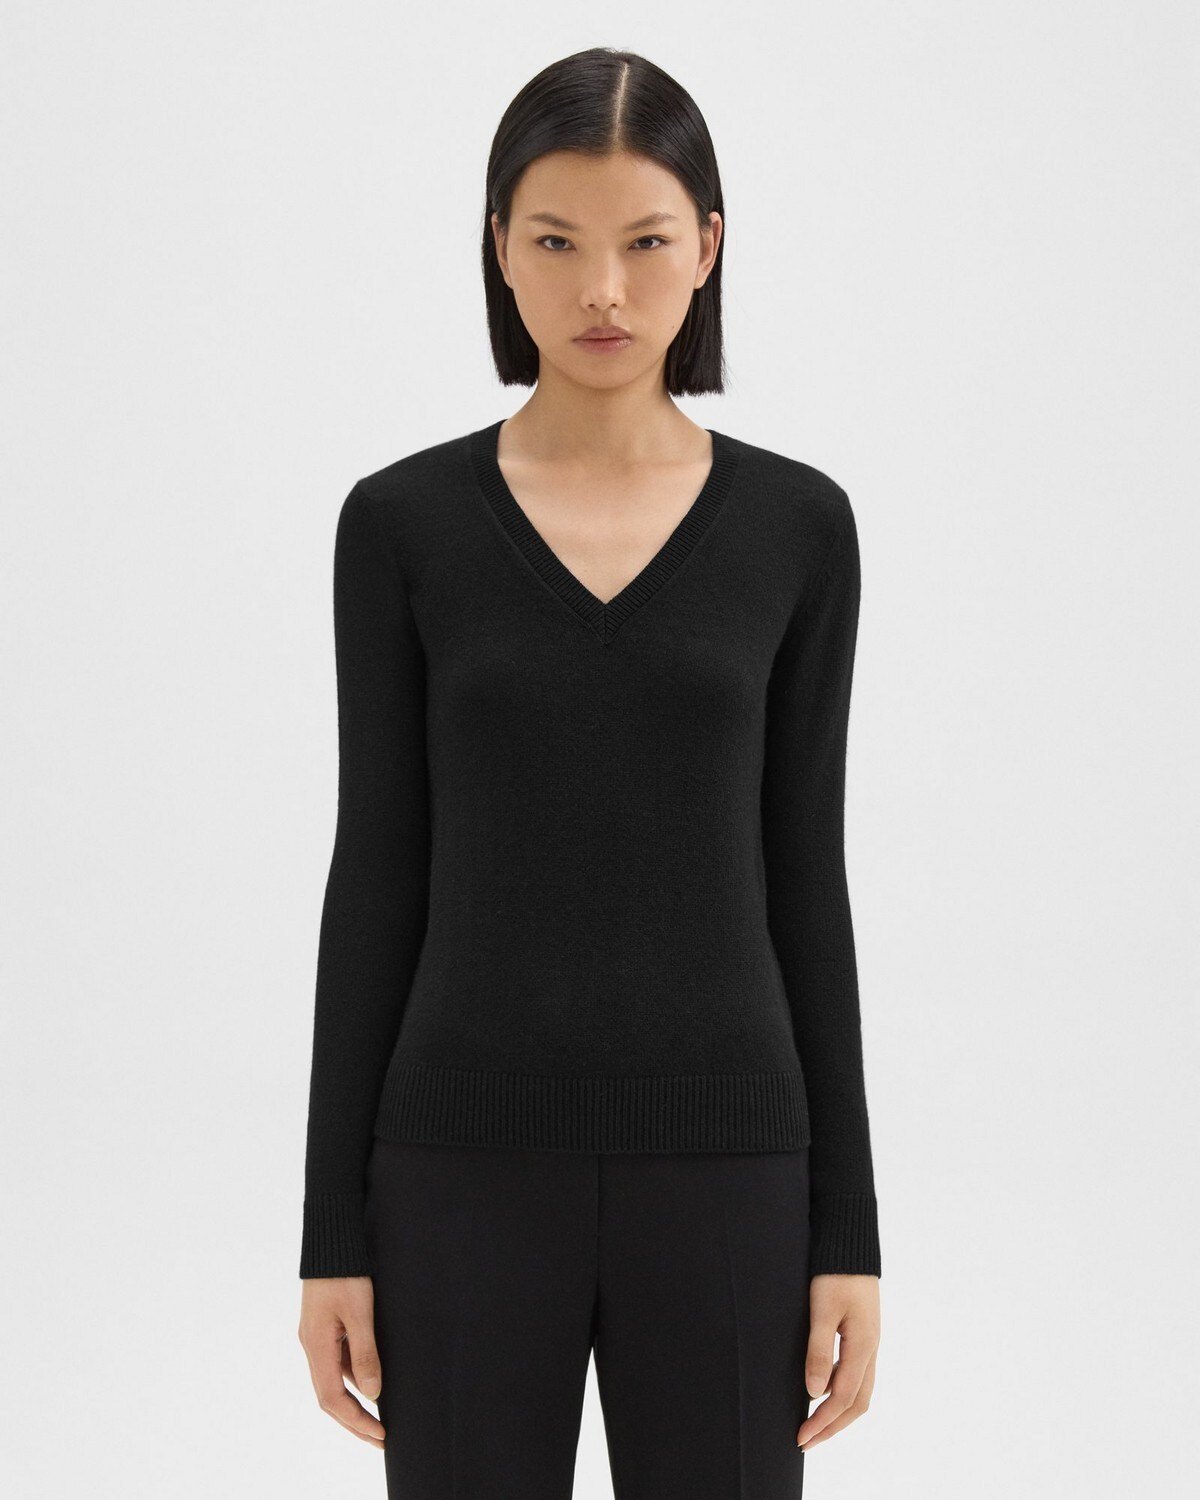 Women's Knitwear | Theory Official Site